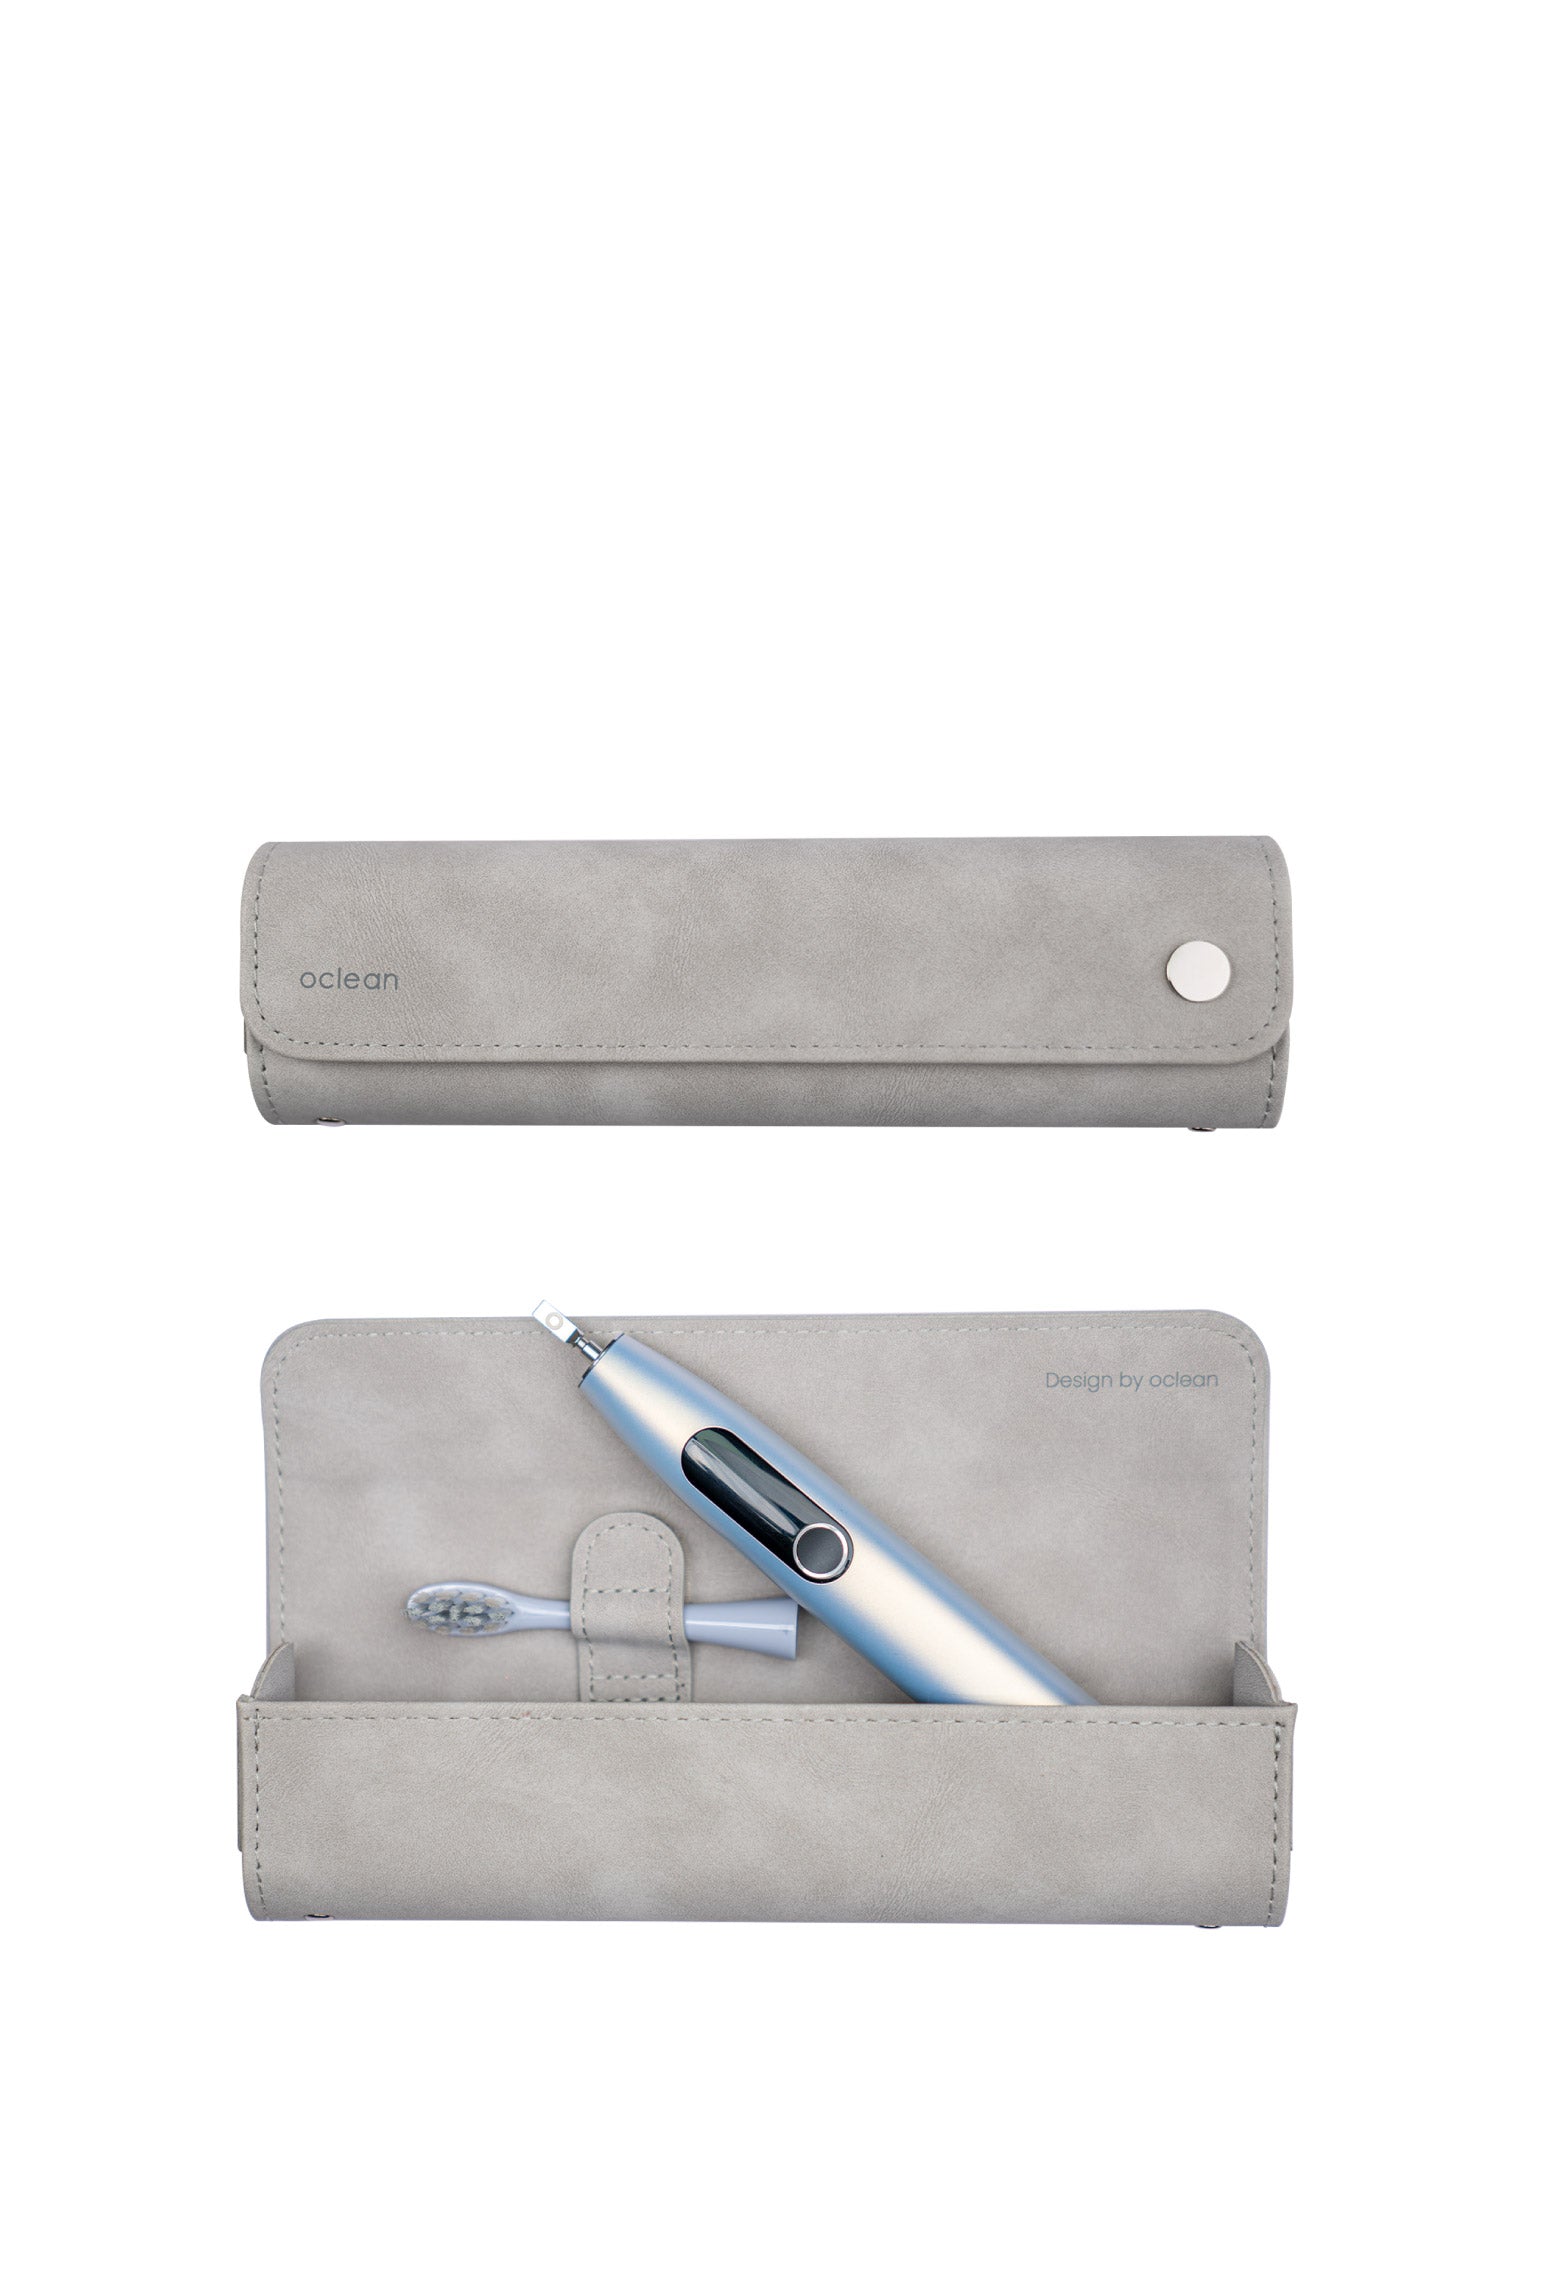 Oclean Travel Case-Toothbrush Covers-Oclean US Store